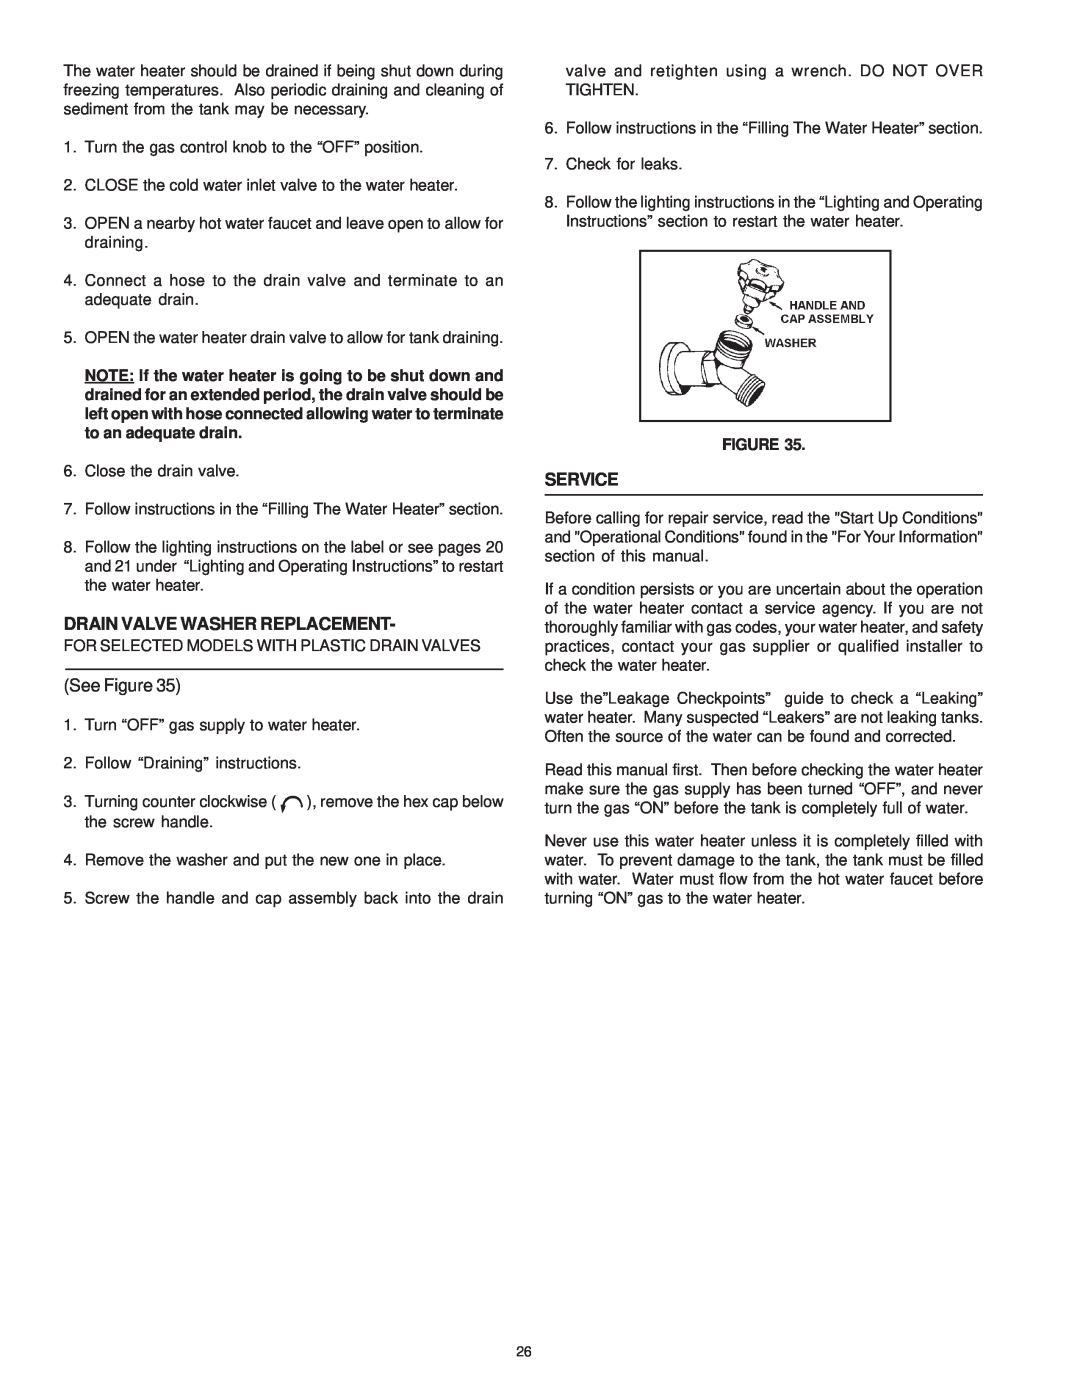 Reliance Water Heaters 196296-001, 606 Series instruction manual Drain Valve Washer Replacement, See Figure, Service 